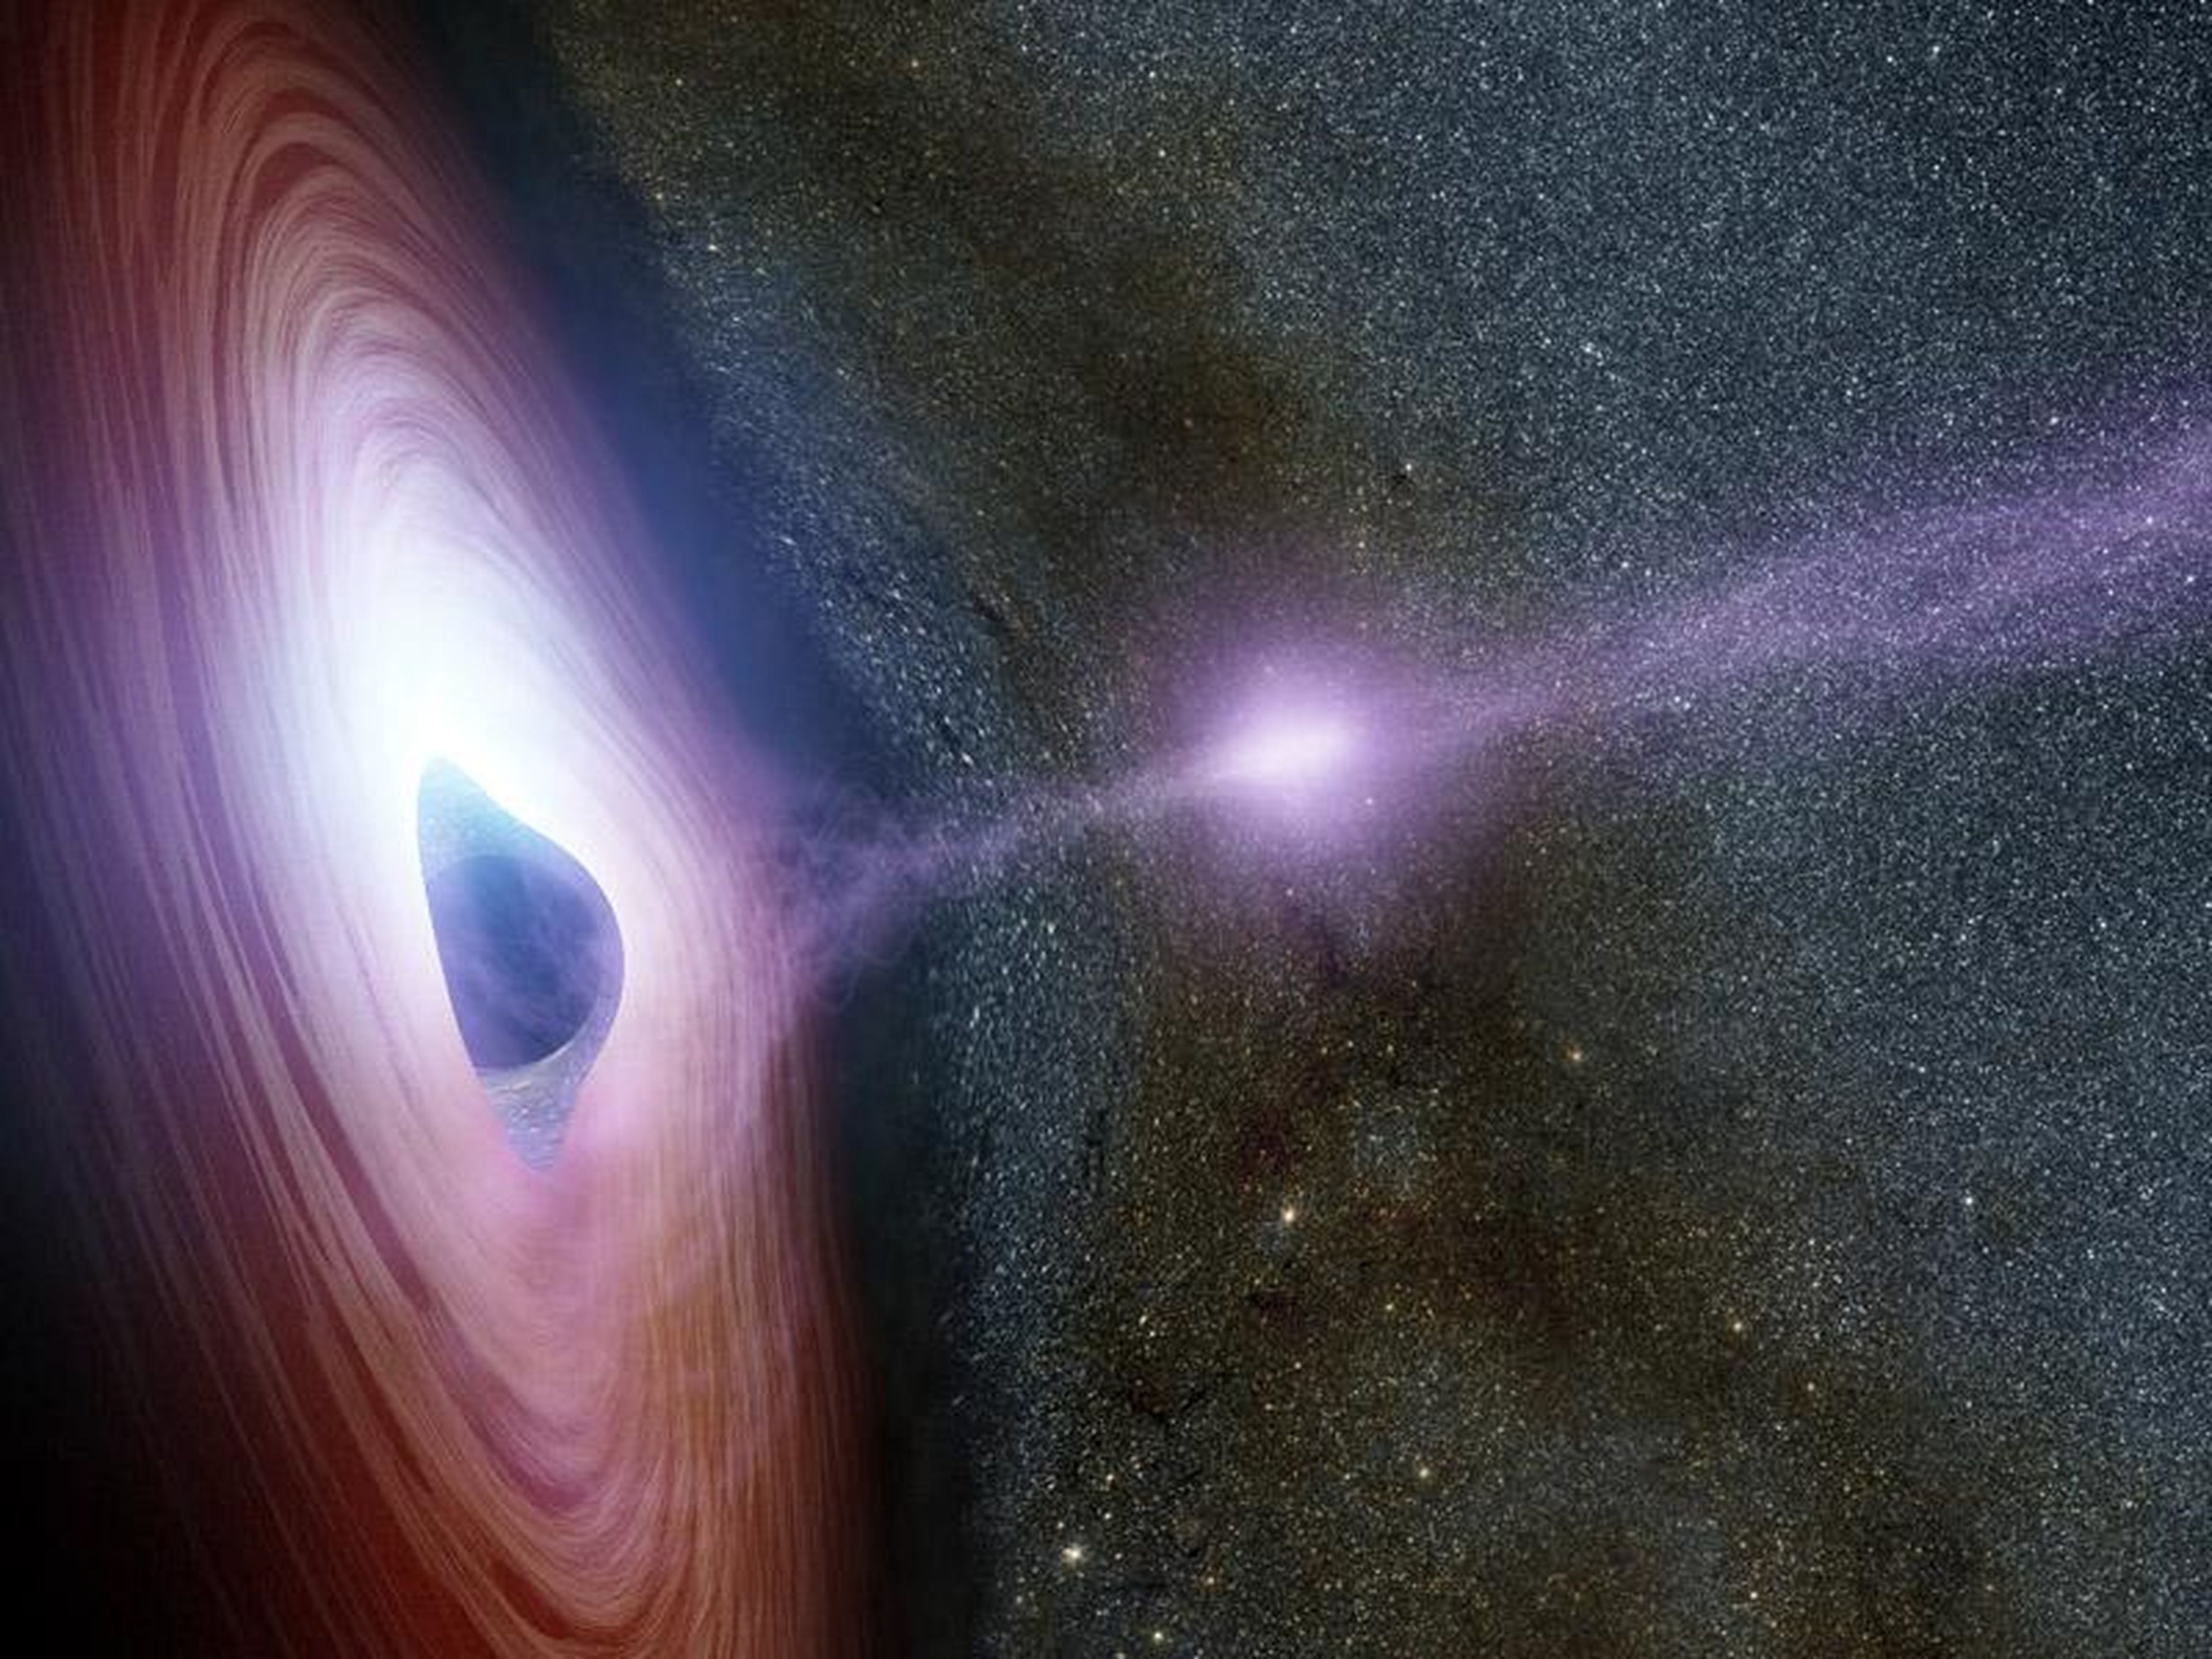 An artist's concept of a supermassive black hole surrounded by a swirling disk of material falling onto it.